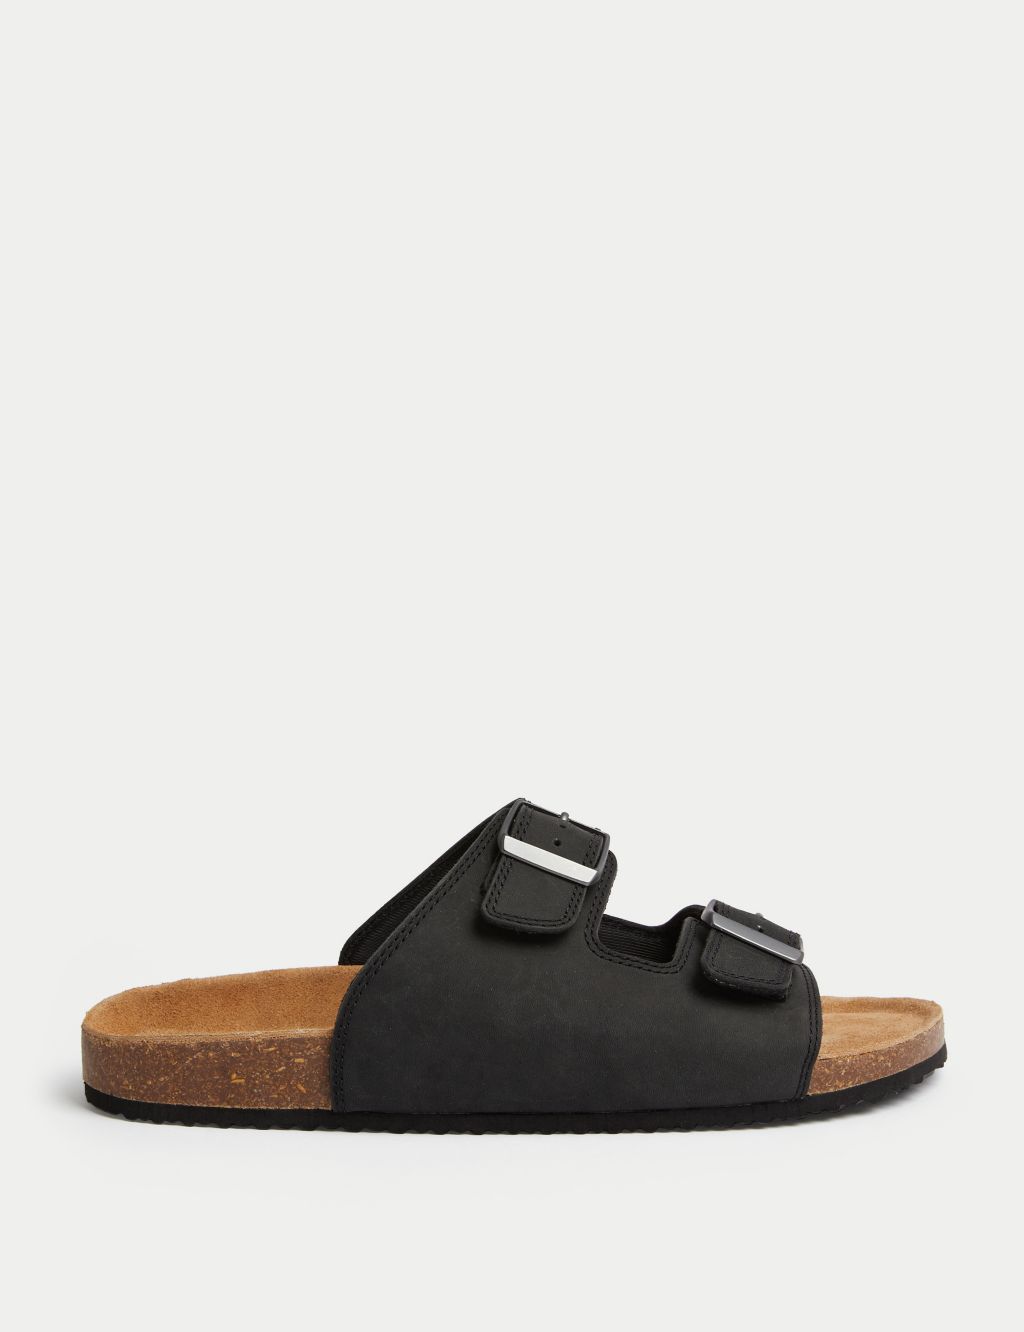 Leather Slip-On Sandals | M&S Collection | M&S